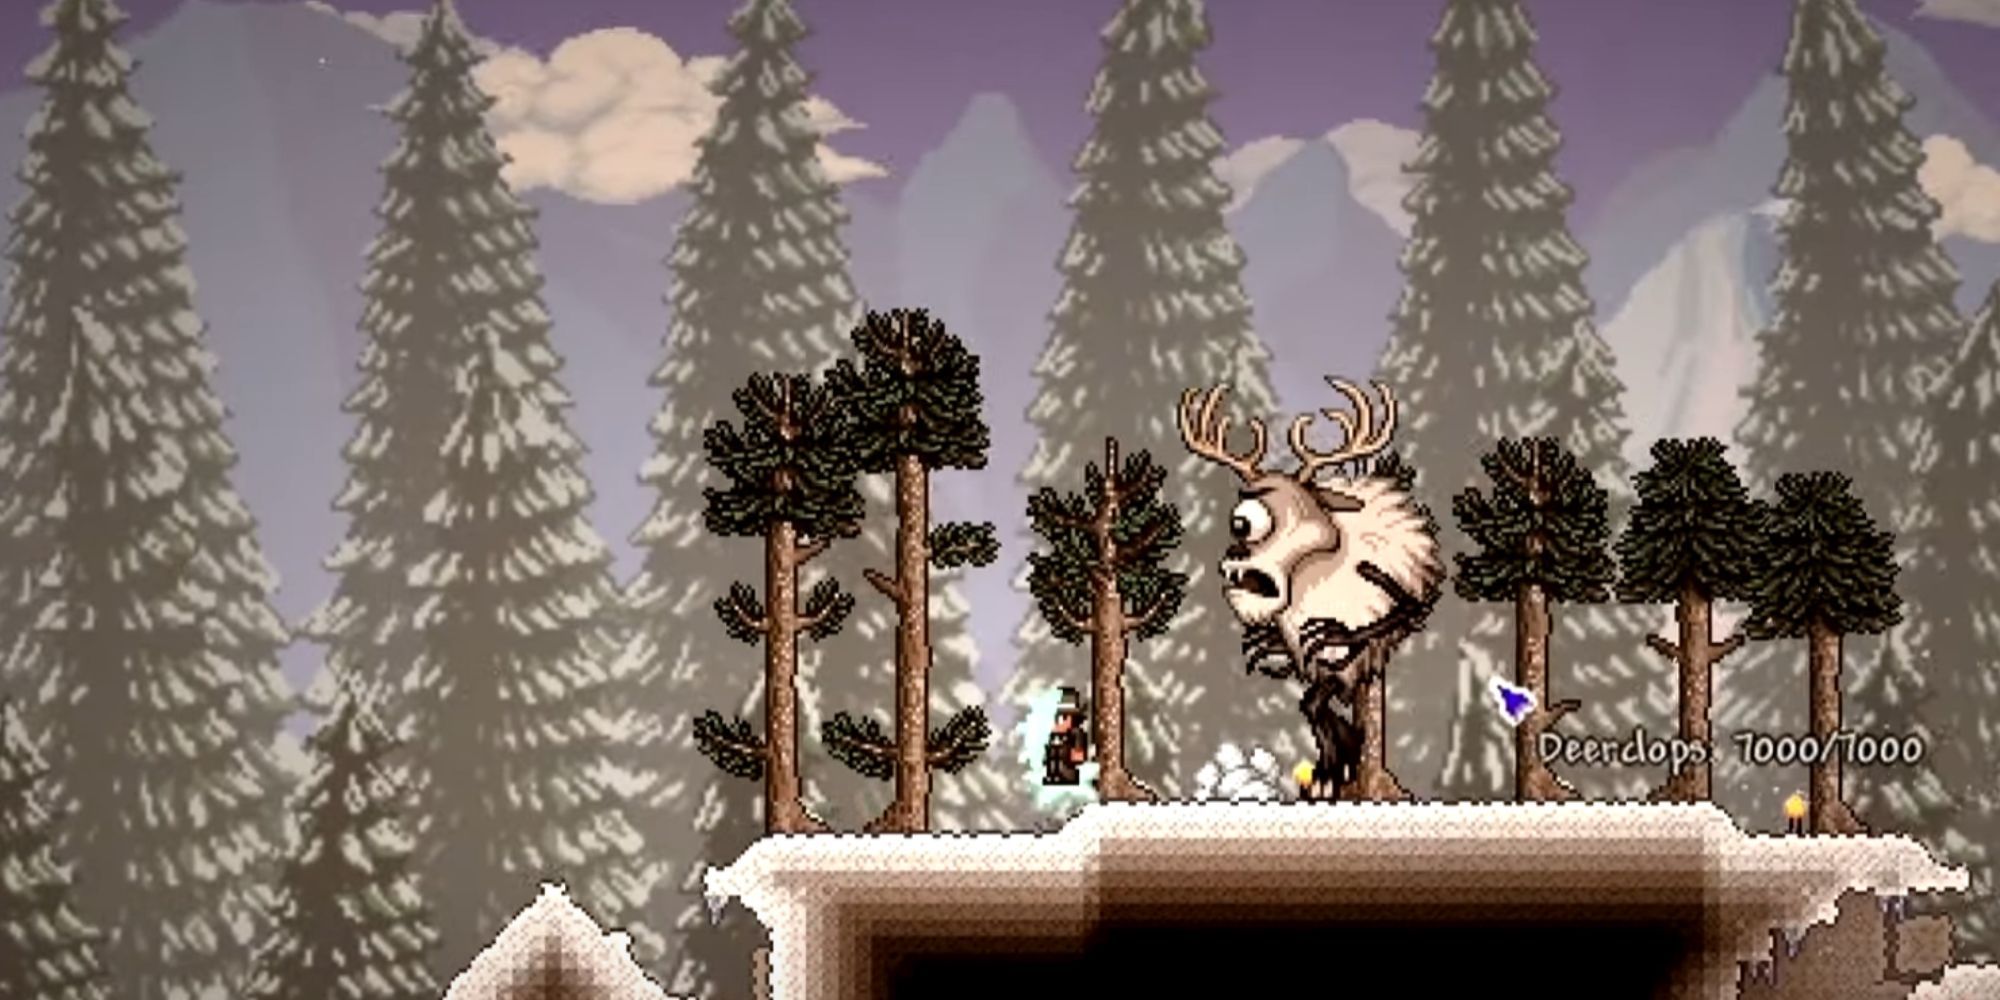 terraria deerclops boss attacking a player in the snowy forest